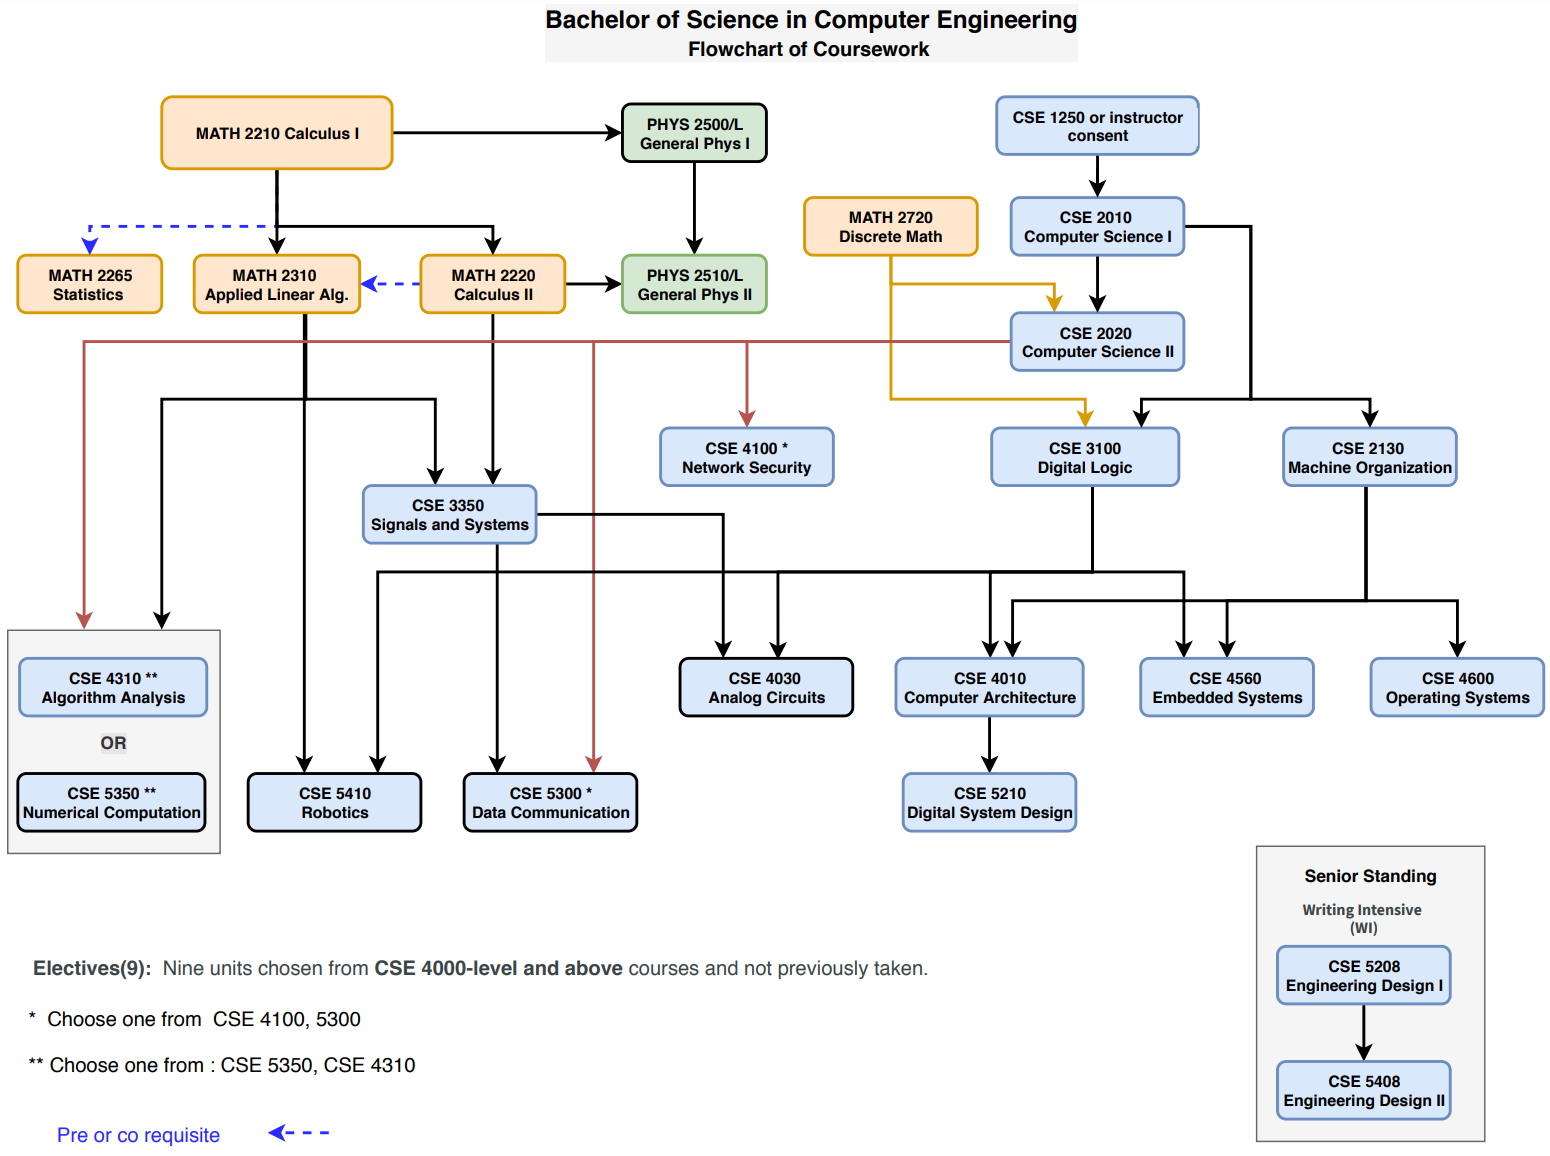 Bachelor of Science in Compter Engineering Flowchart of Coursework